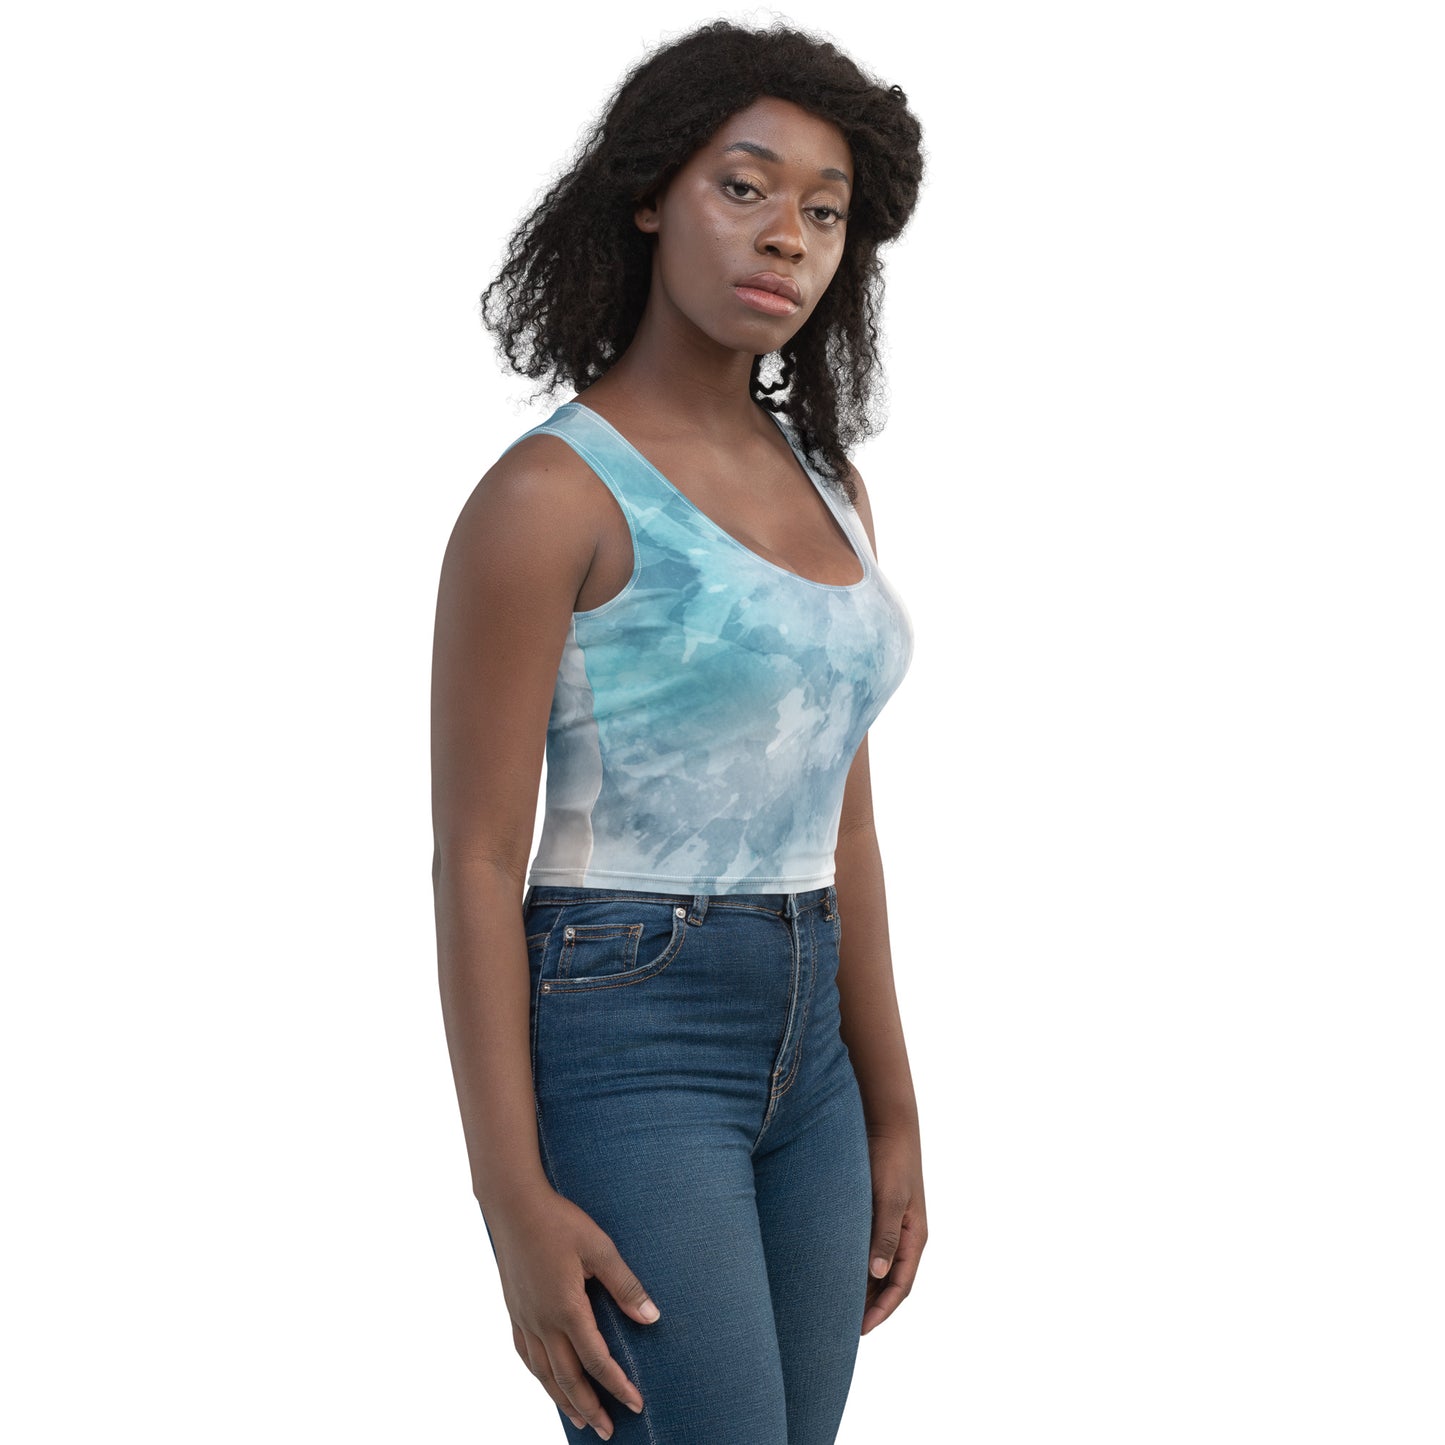 To Dye For Sky Crop Top